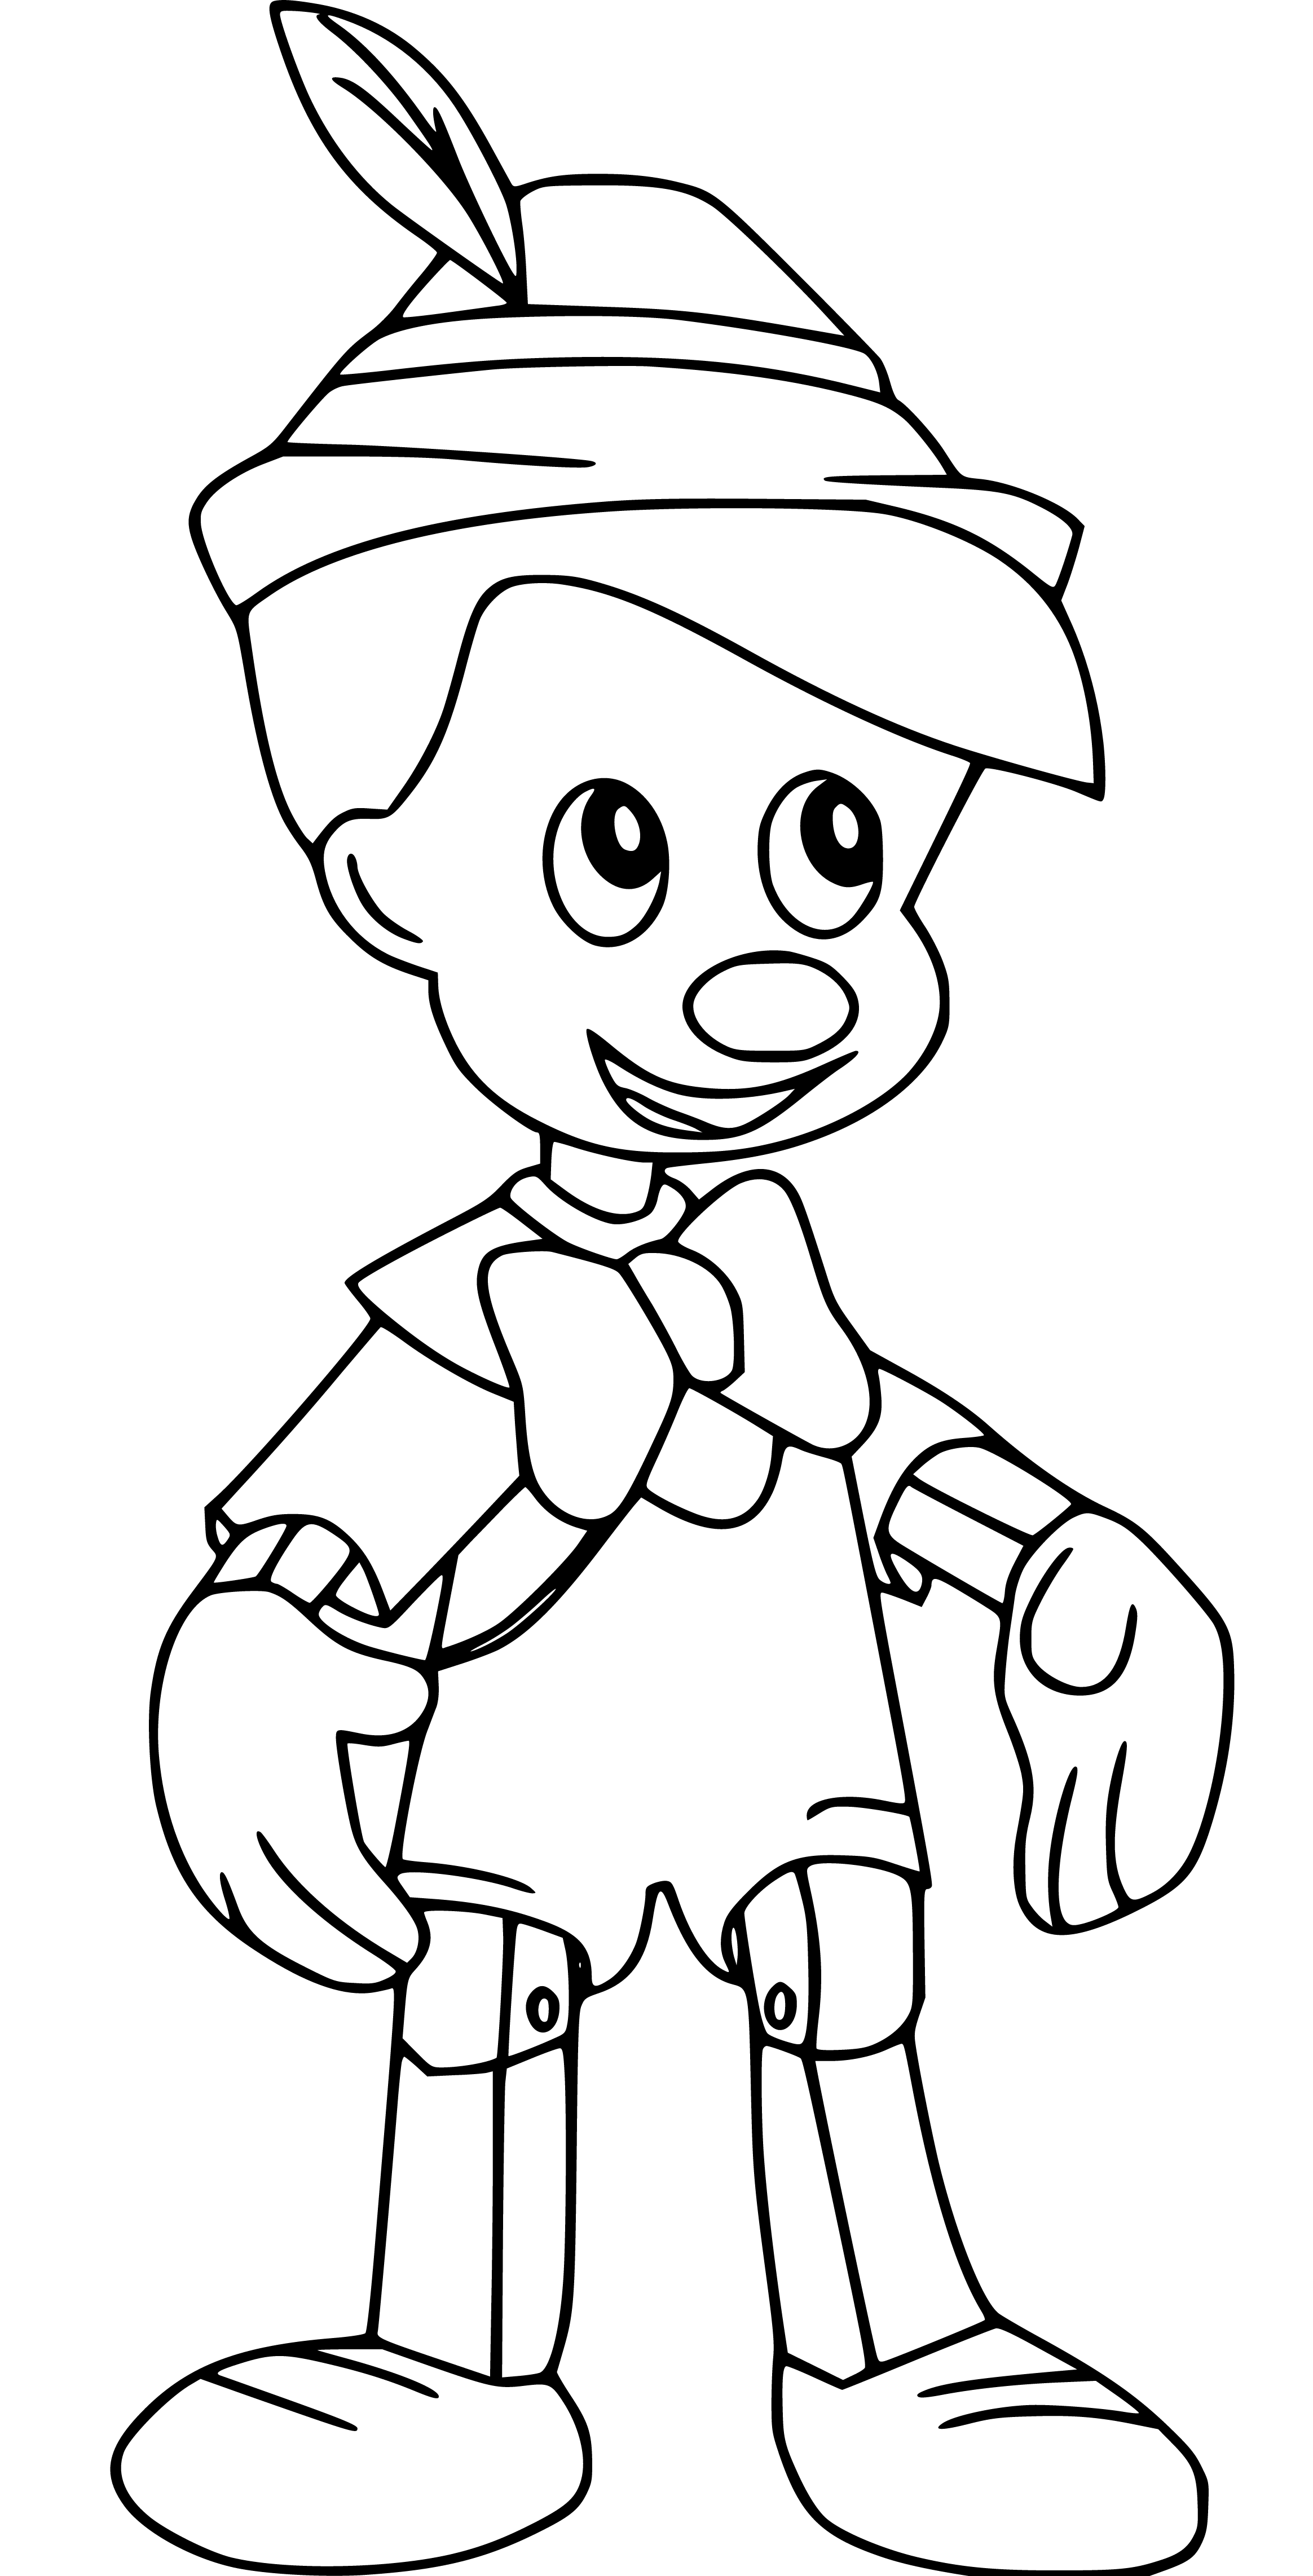 Pinocchio Coloring Page 1